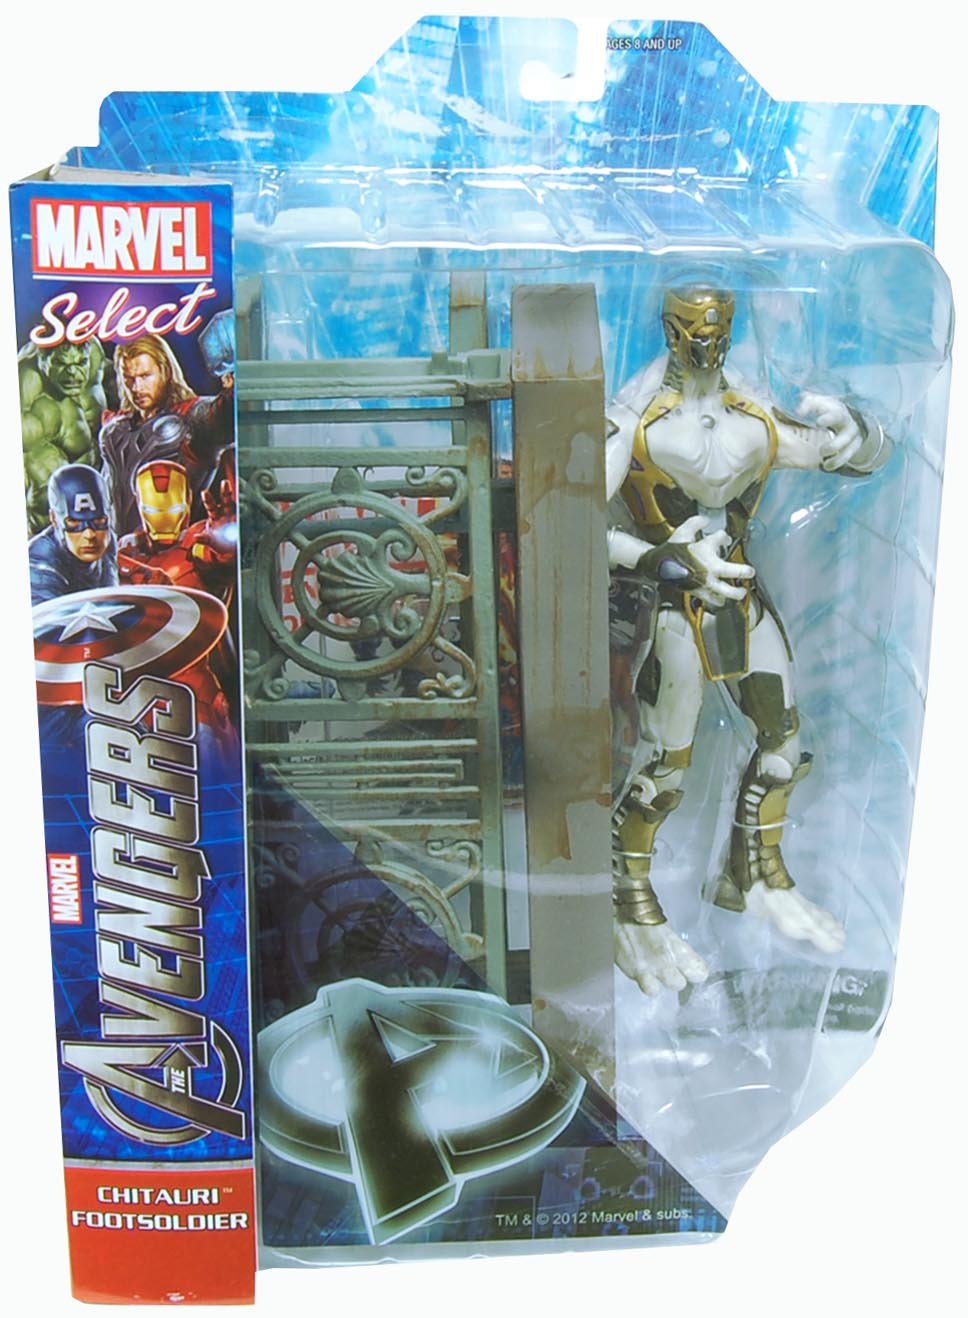 Marvel Select Chitauri Footsoldier Action Figure